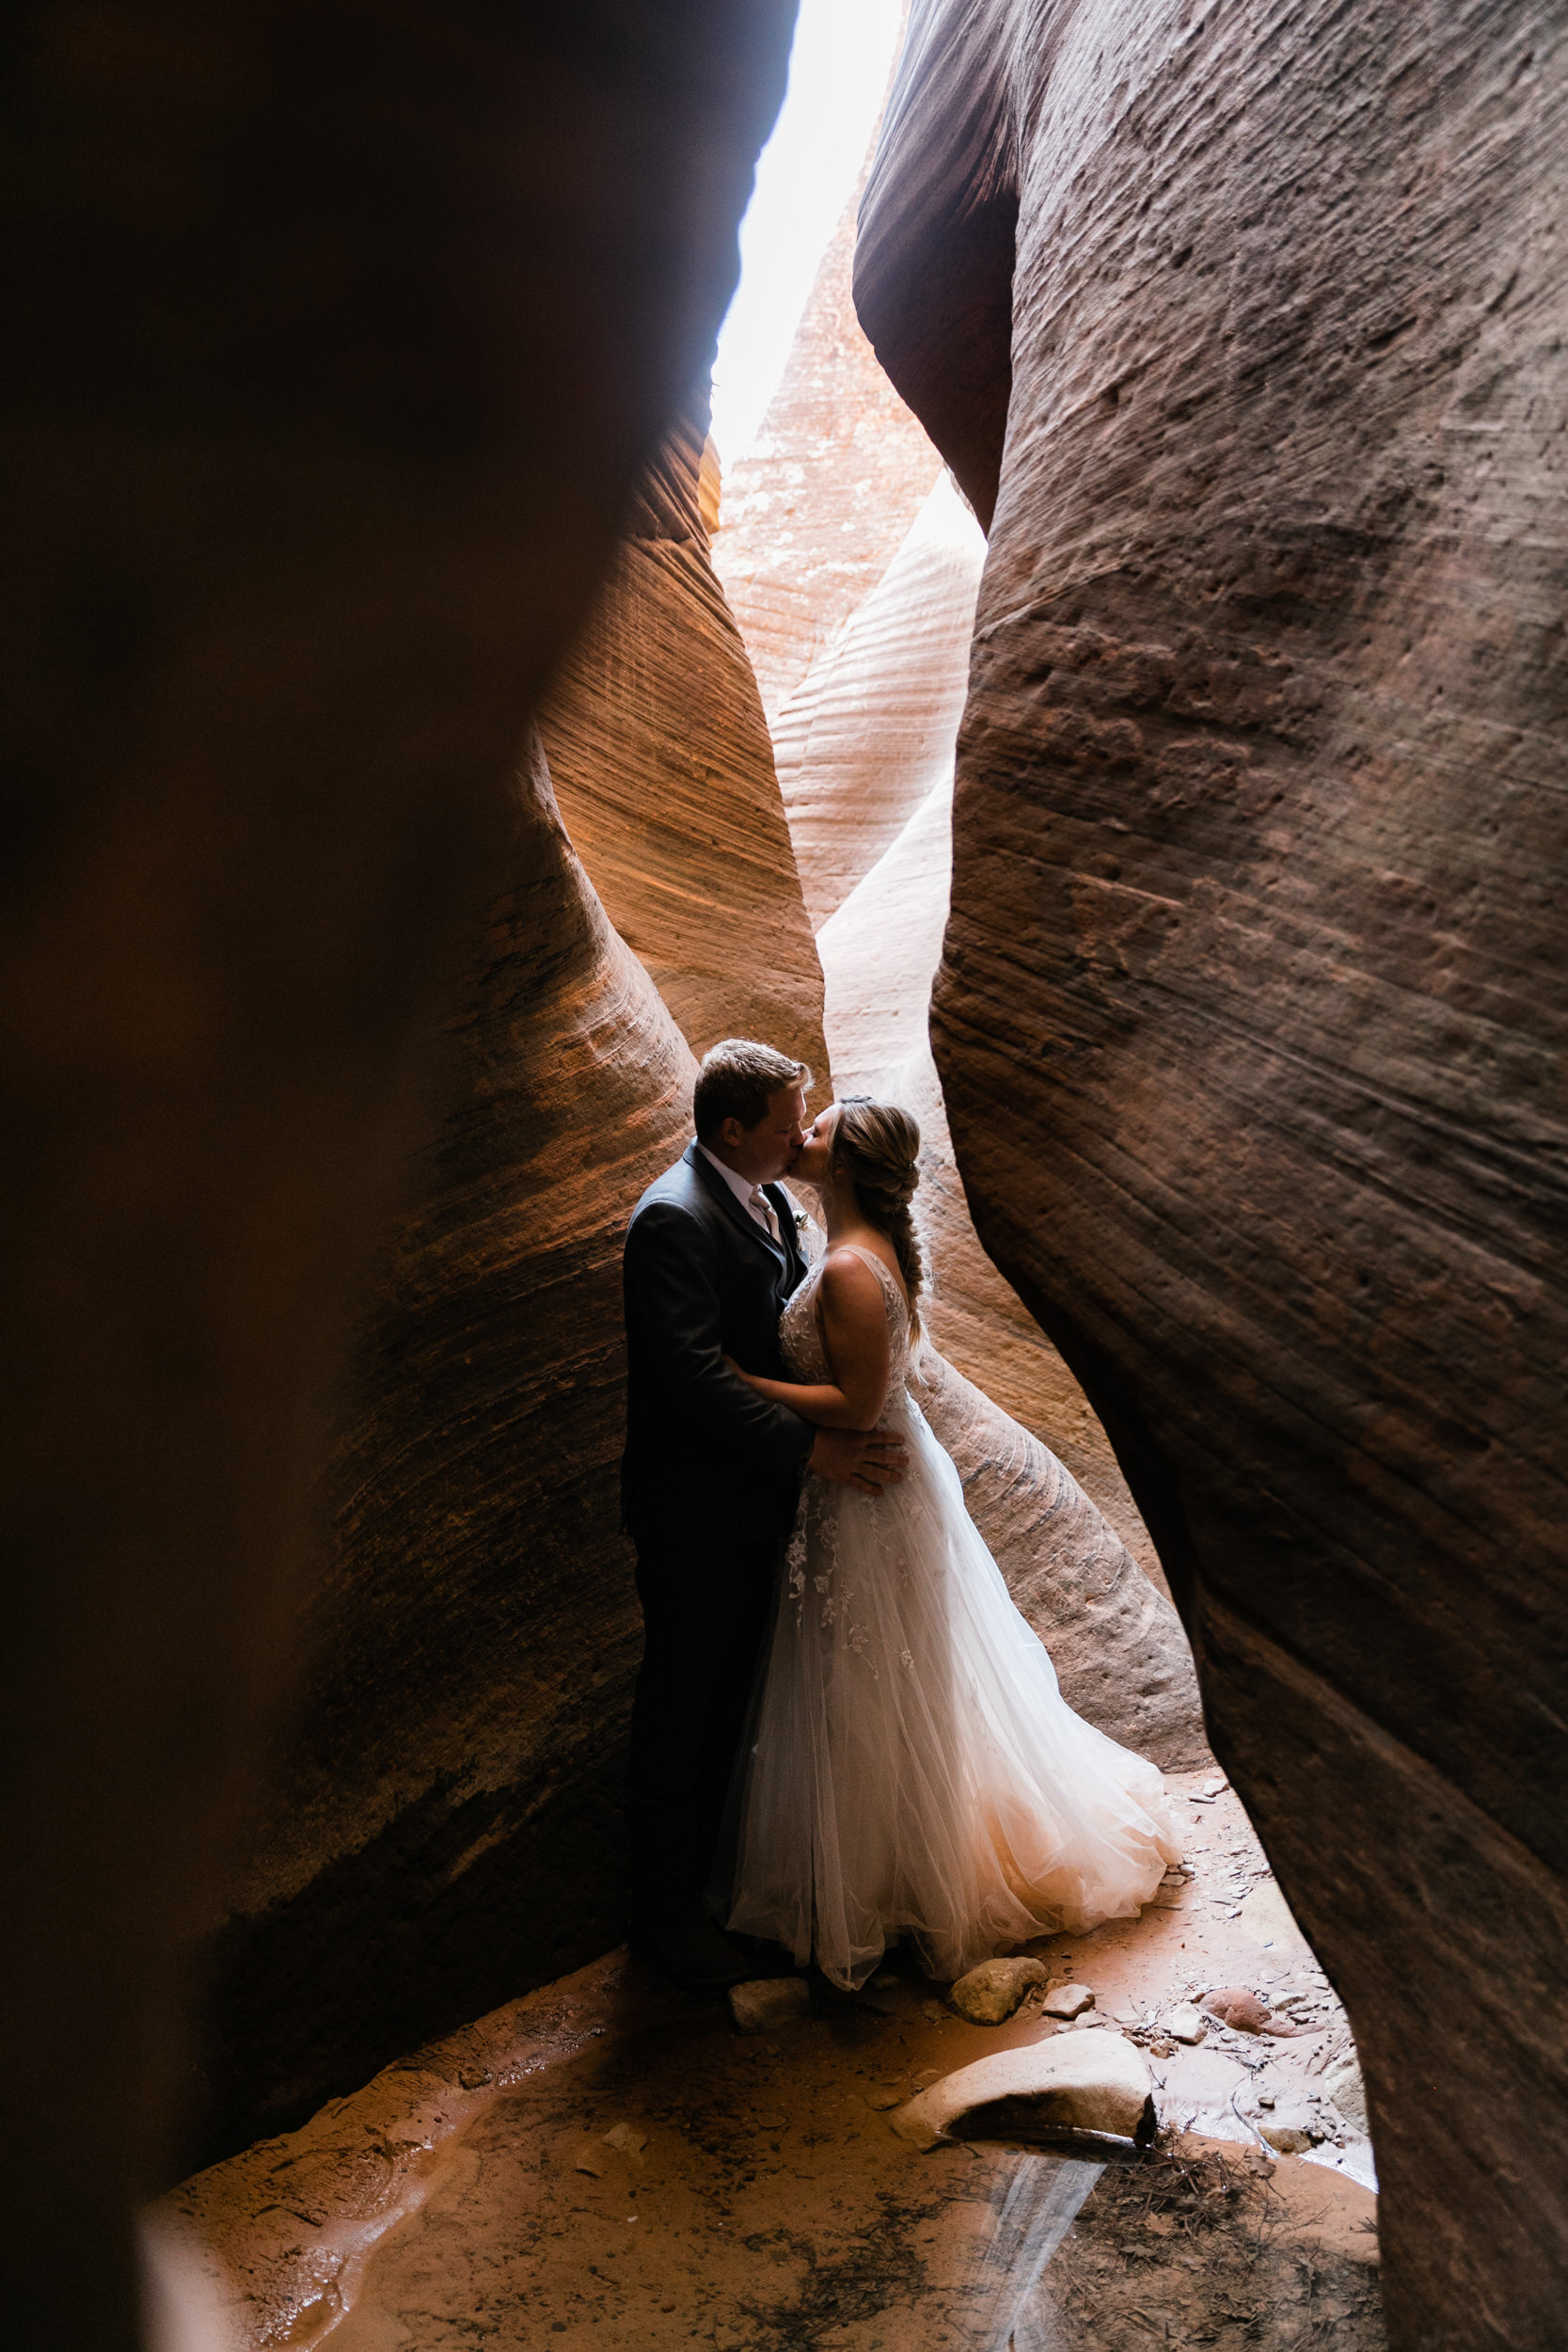 Zion Utah Elopement | Intimate Adventure Wedding in Canyon | The Hearnes Photography